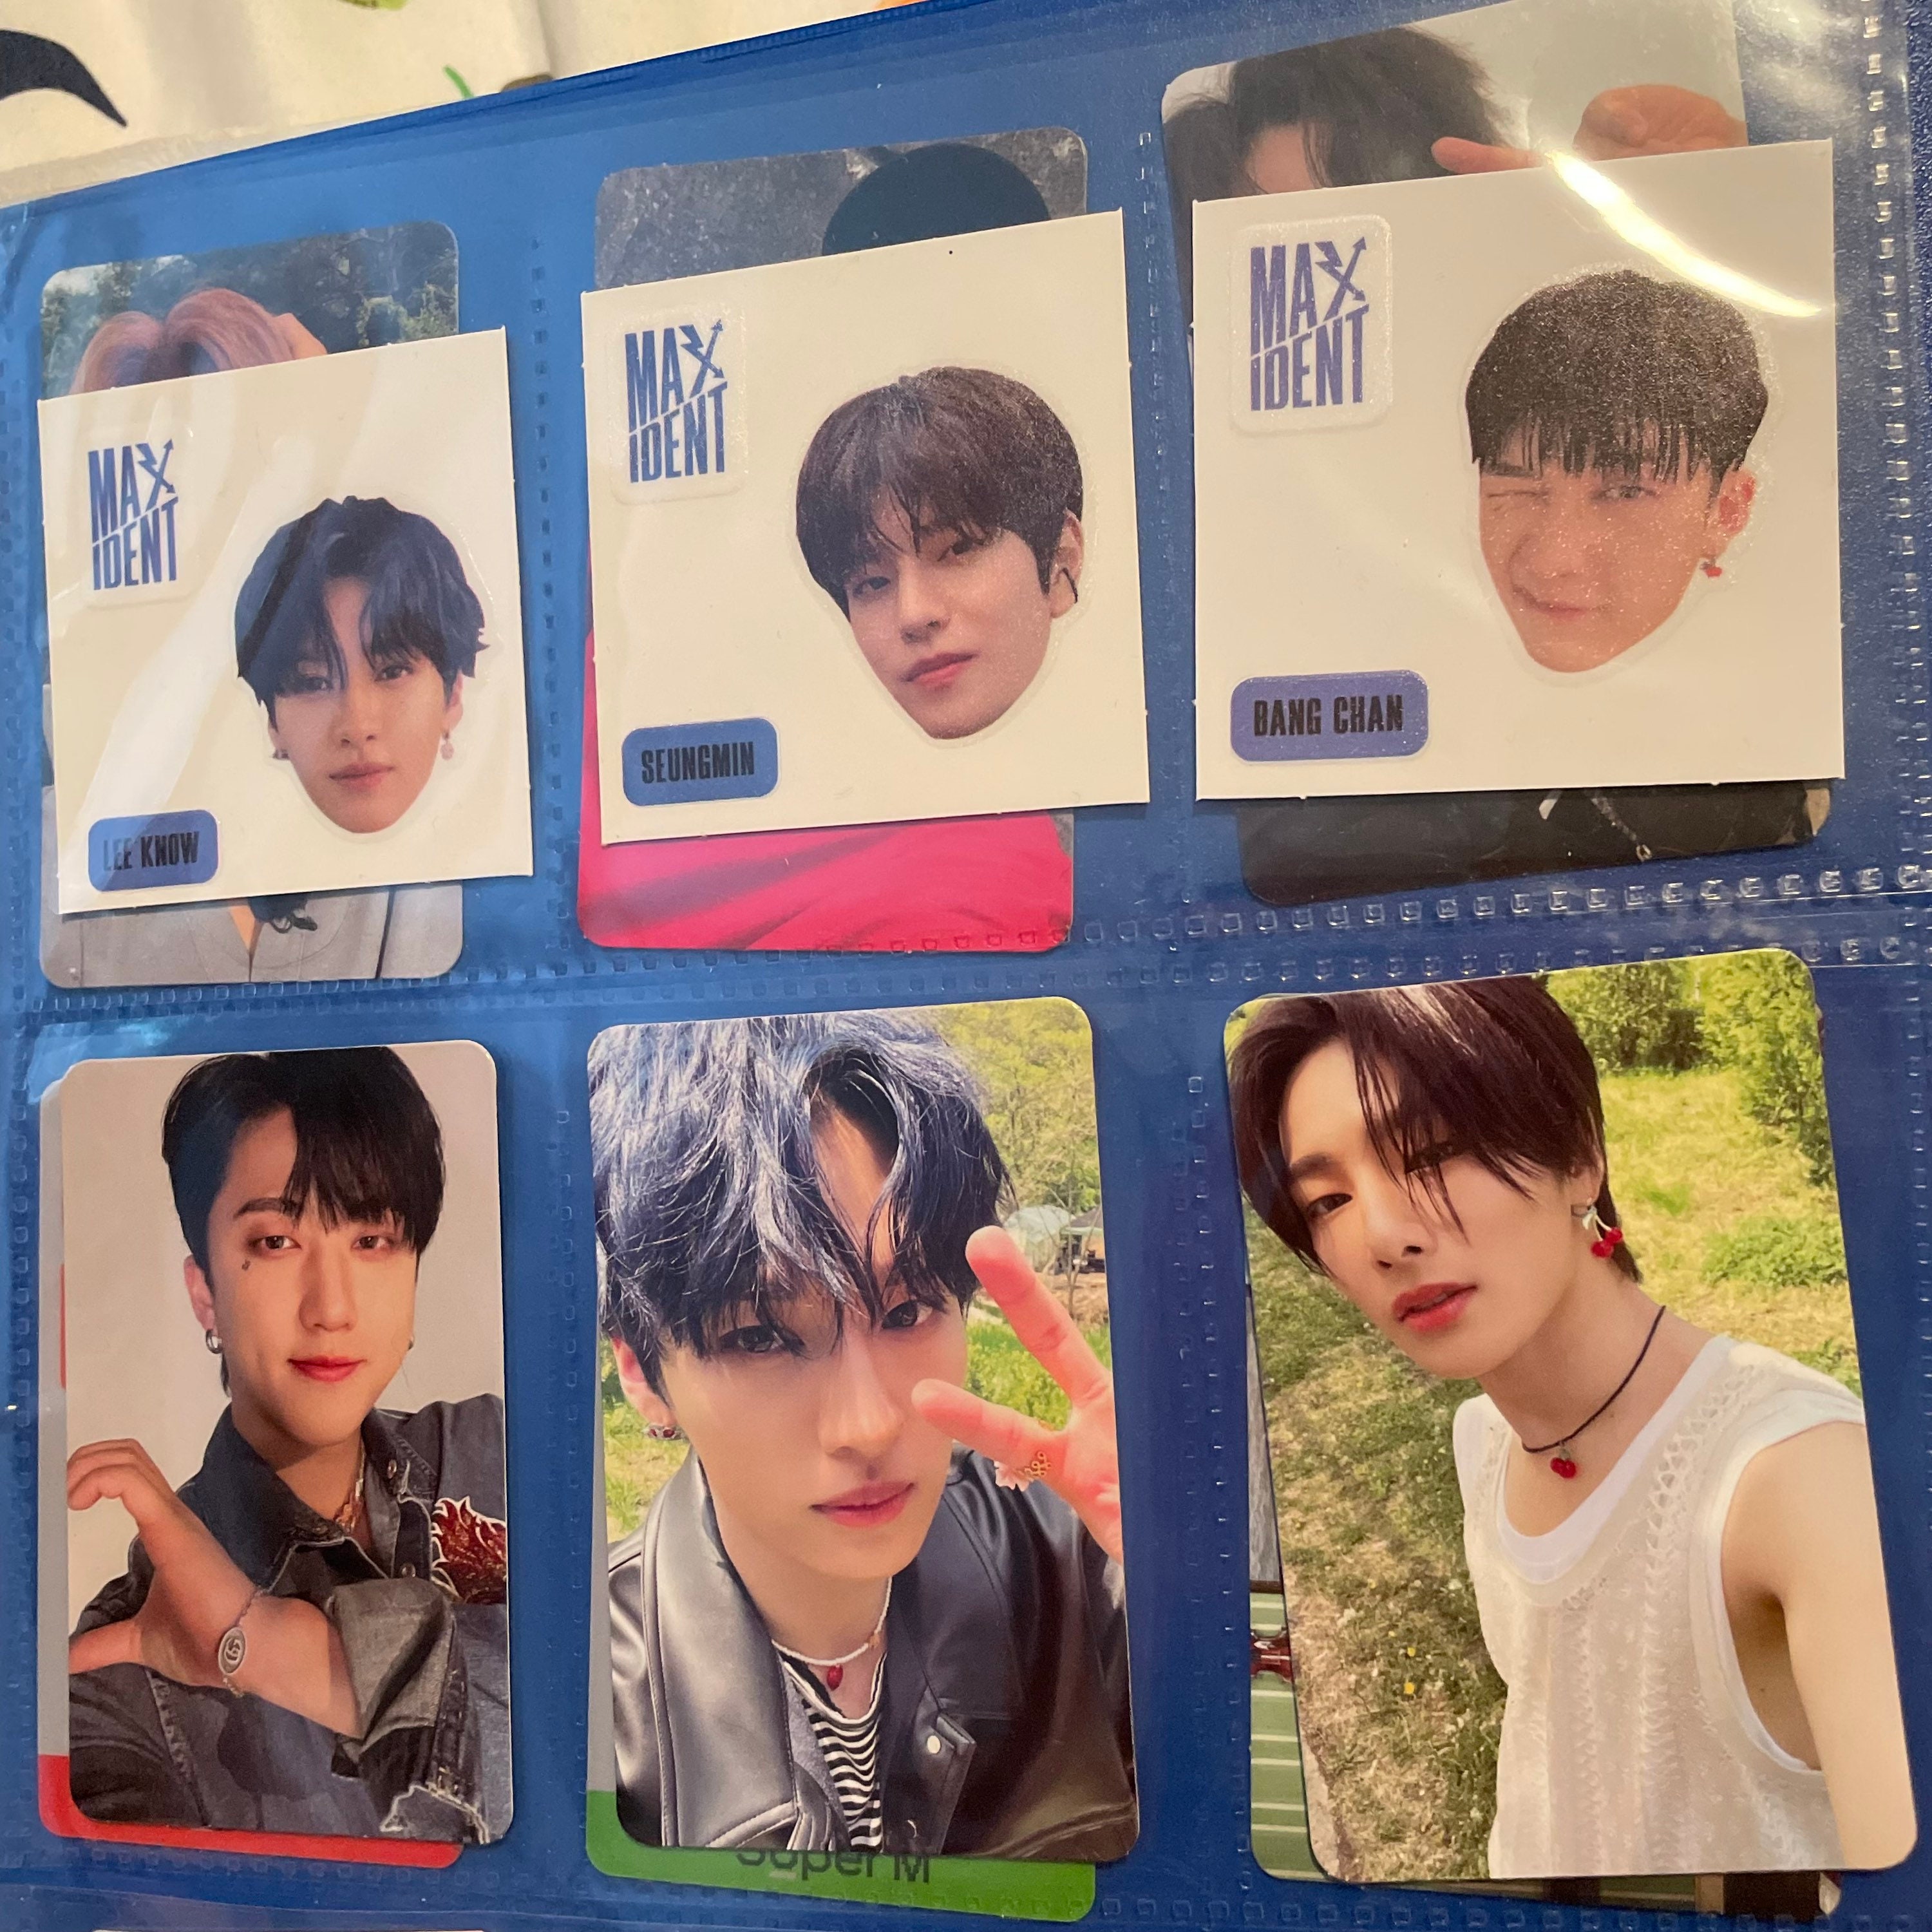 OFFICIAL stray kids maxident photocards and stickers (lee know, seungmin,  bang chan, changbin, i.n./jeongin)